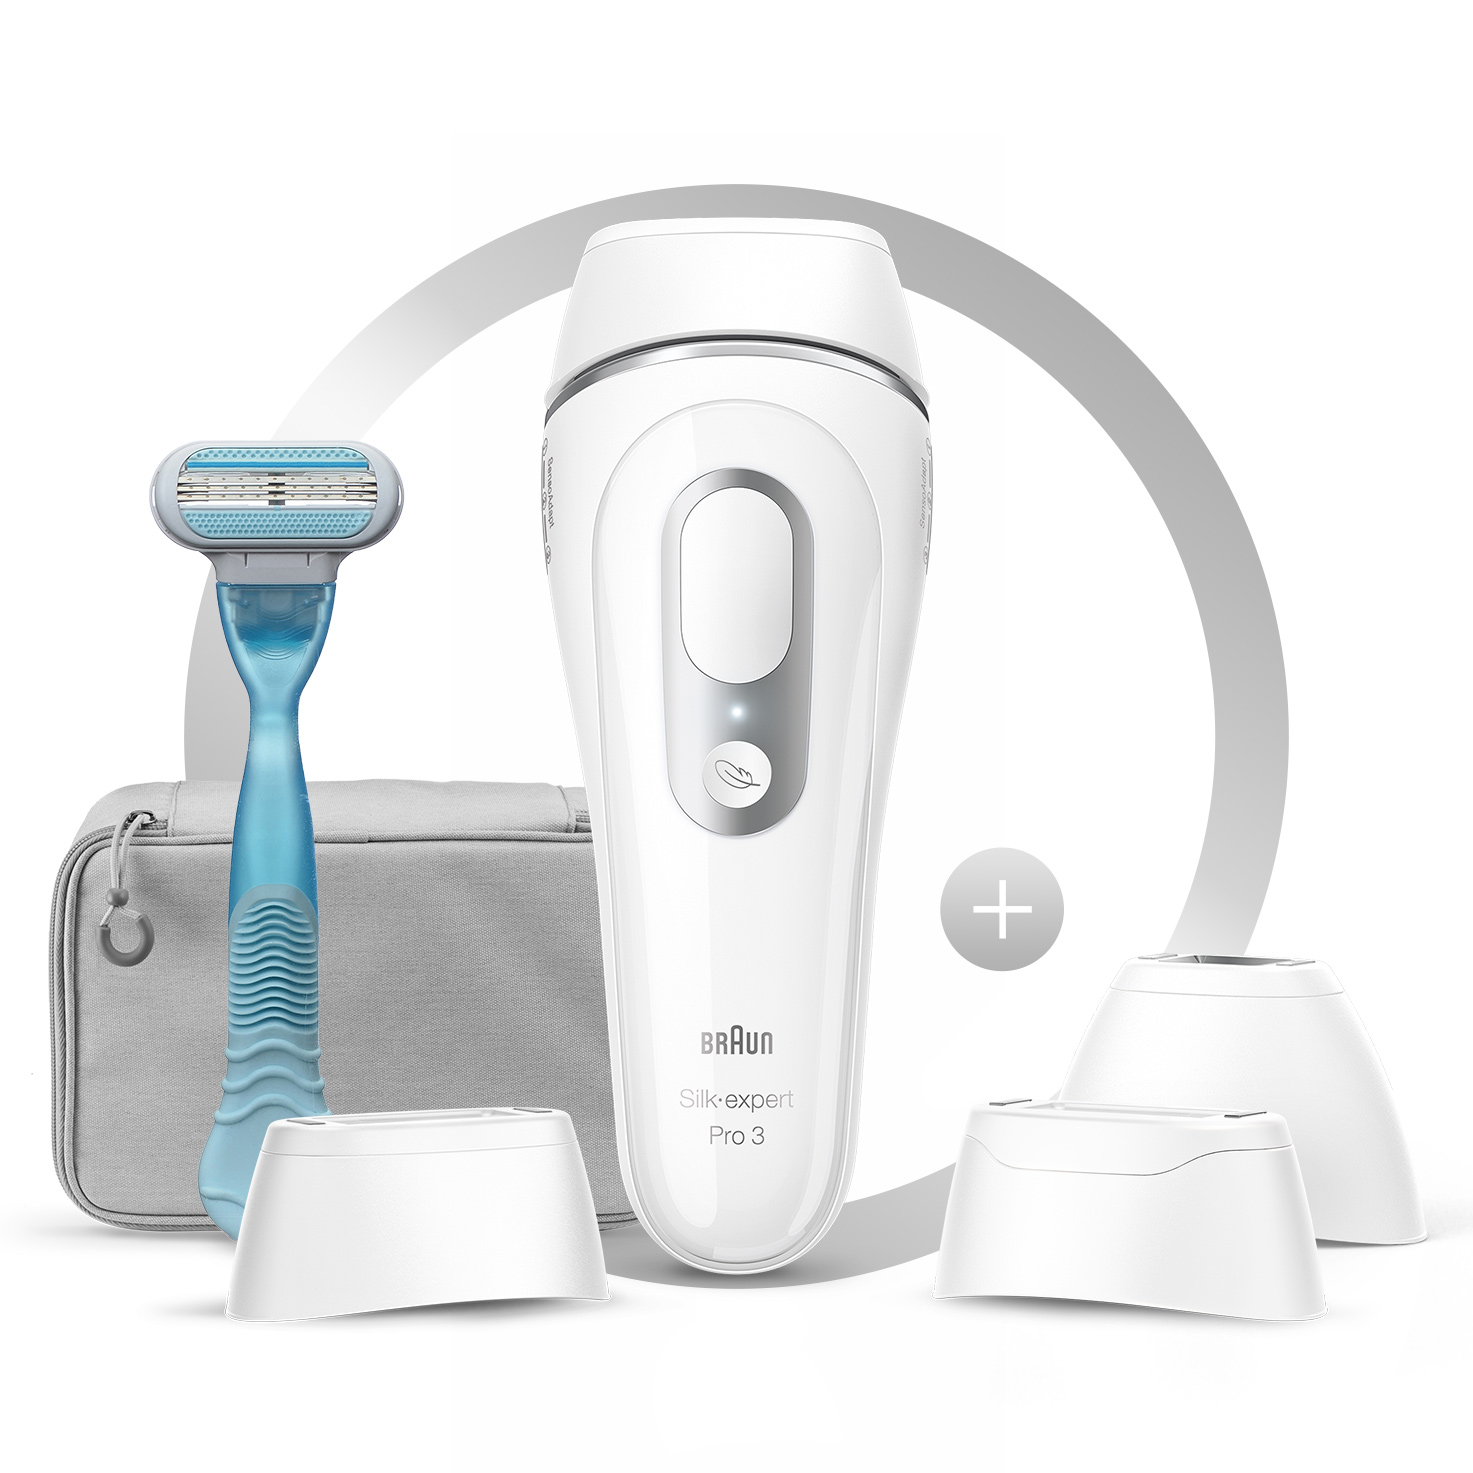 Silk-expert Pro IPL Hair Removal for Device Women